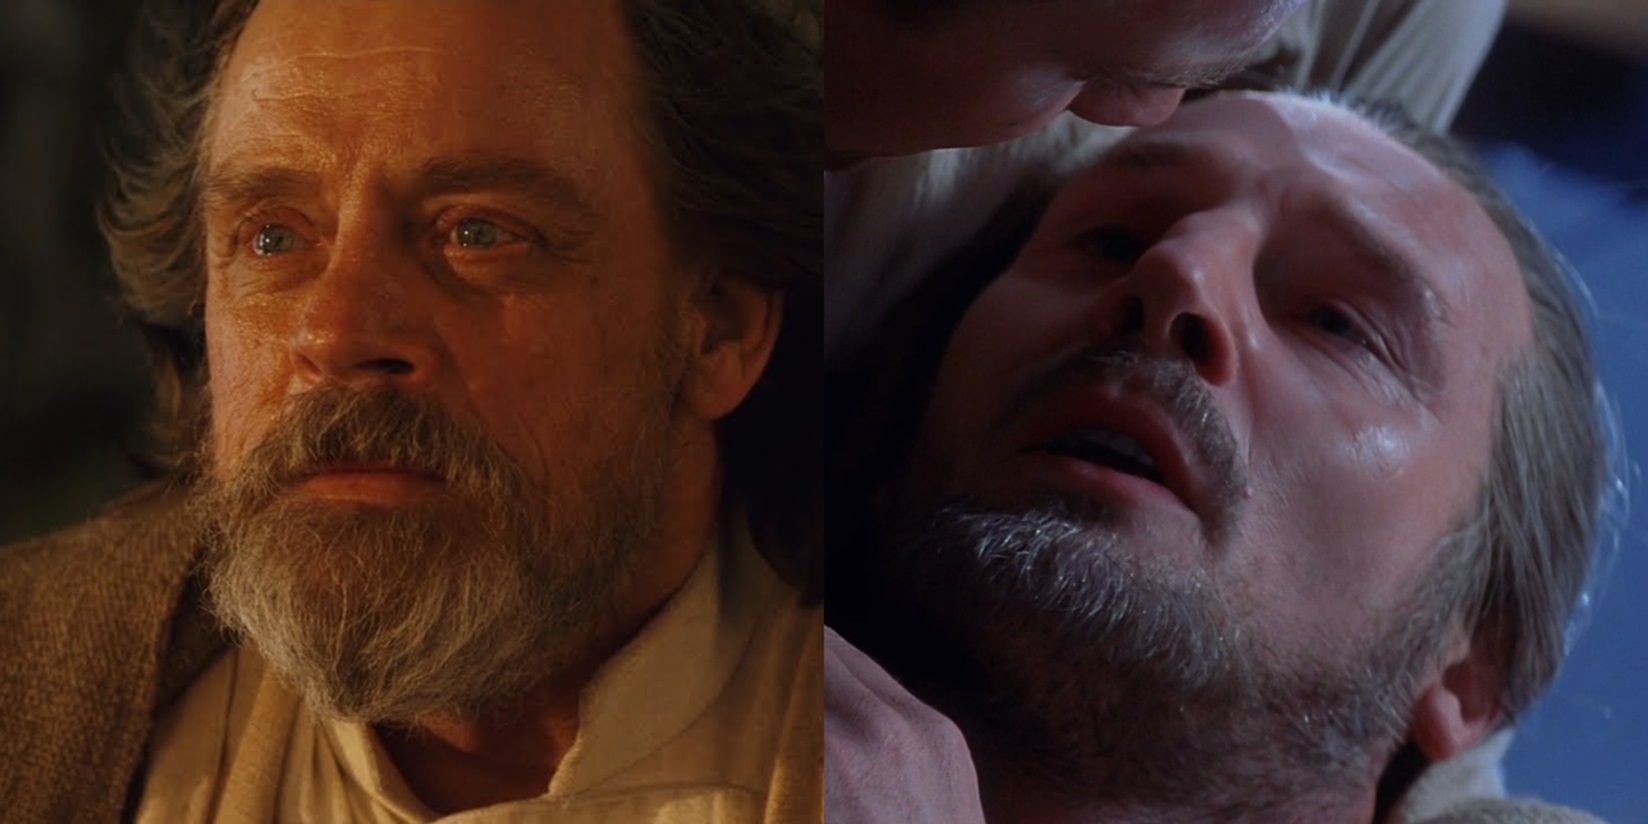 Split image of Luke Skywalker dying in The Last Jedi and Qui-Gon dying in The Phantom Menace